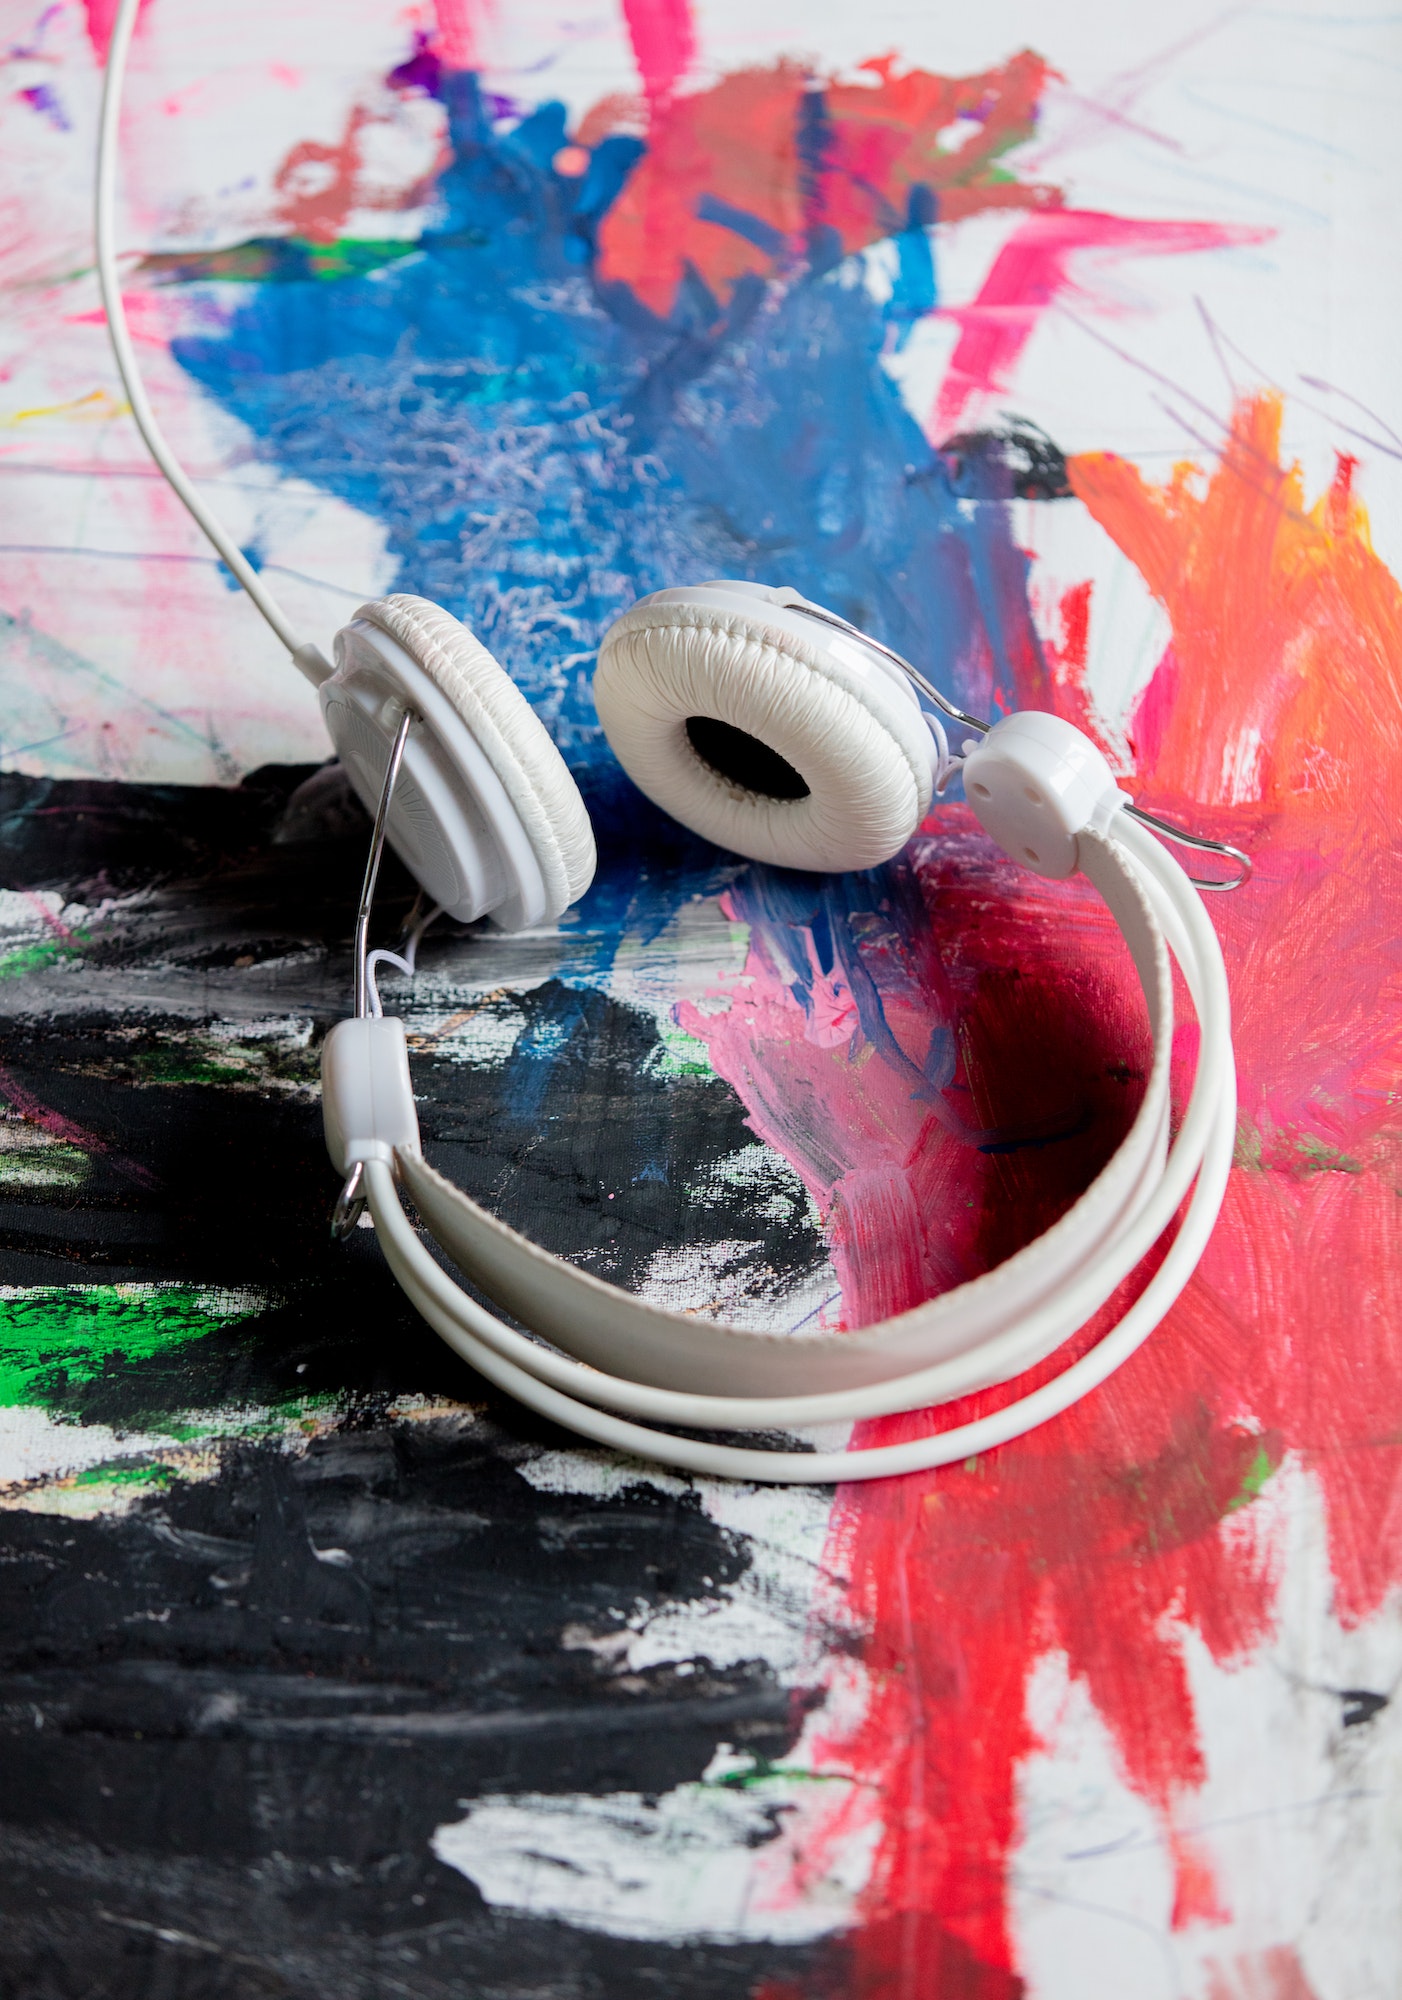 Classic cable headphones on art paint. Above view